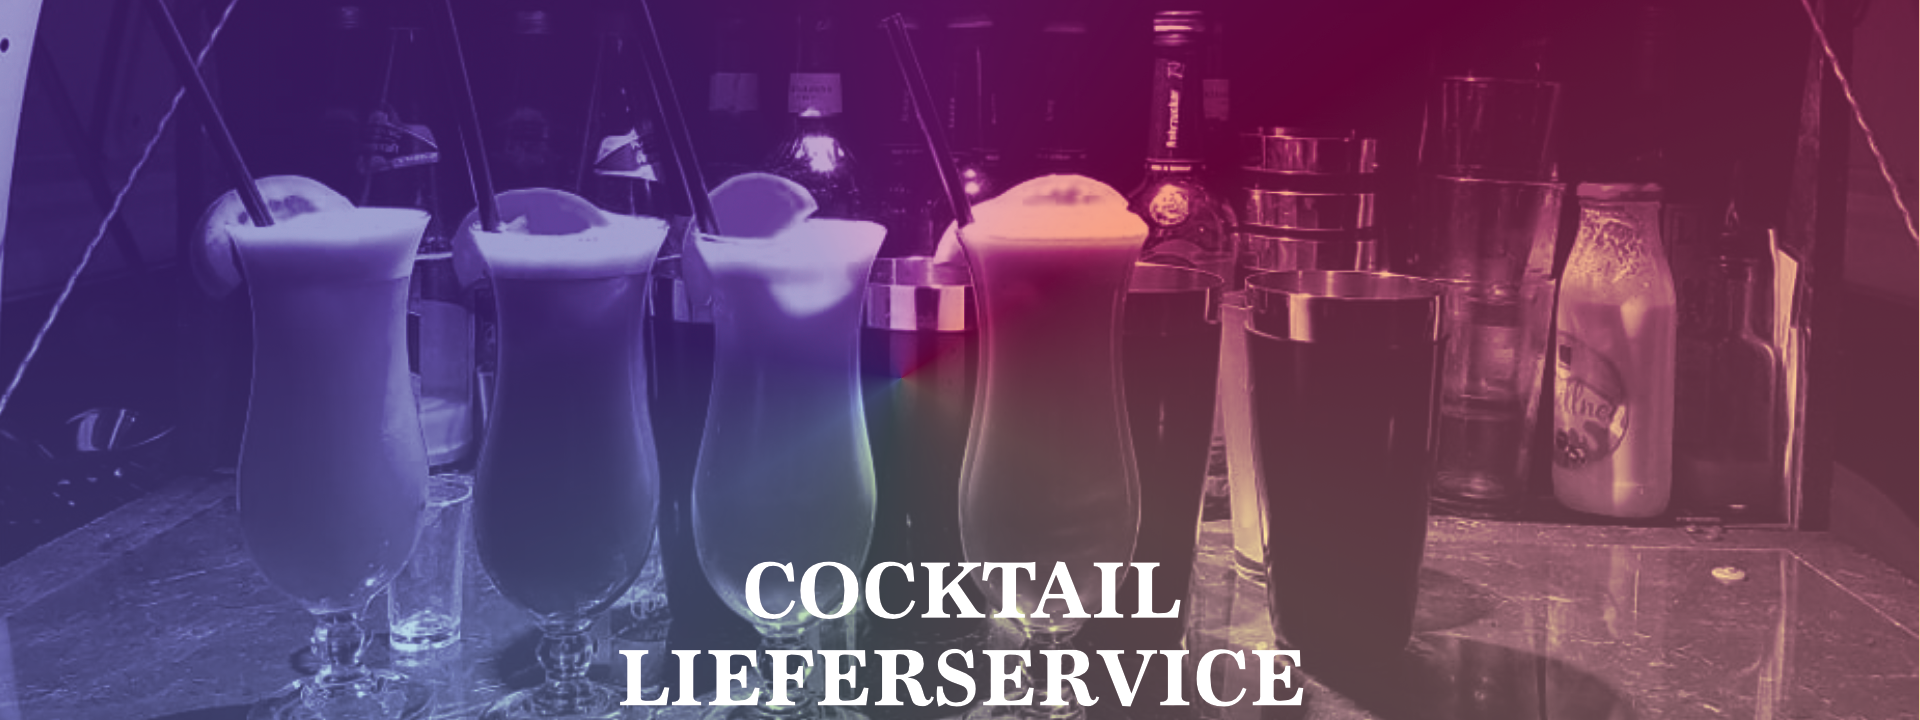 Cocktail Lieferservice